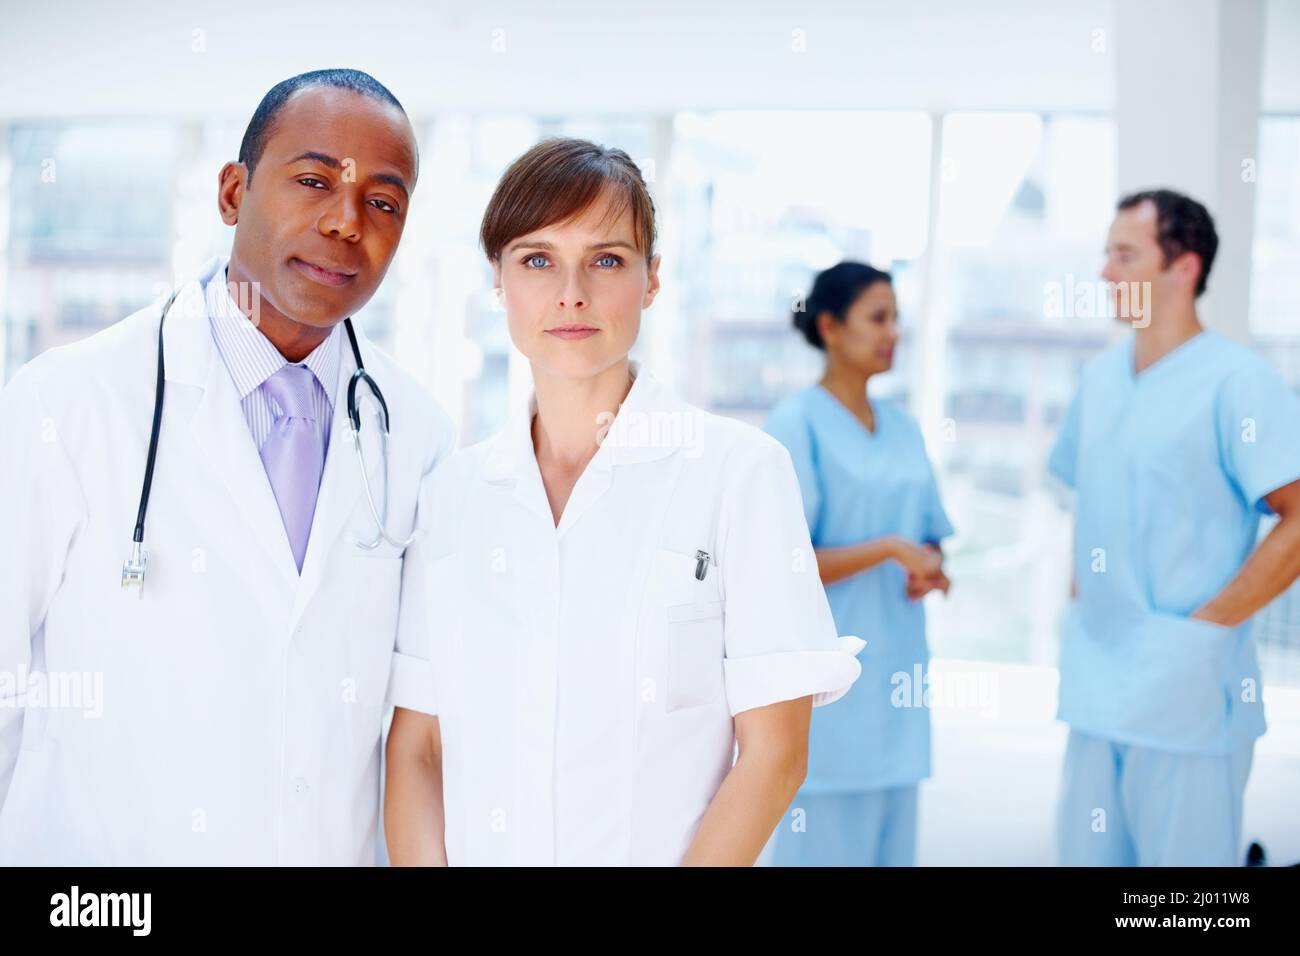 Doctors looking serious. Doctors standing together with nurses in background. Stock Photo